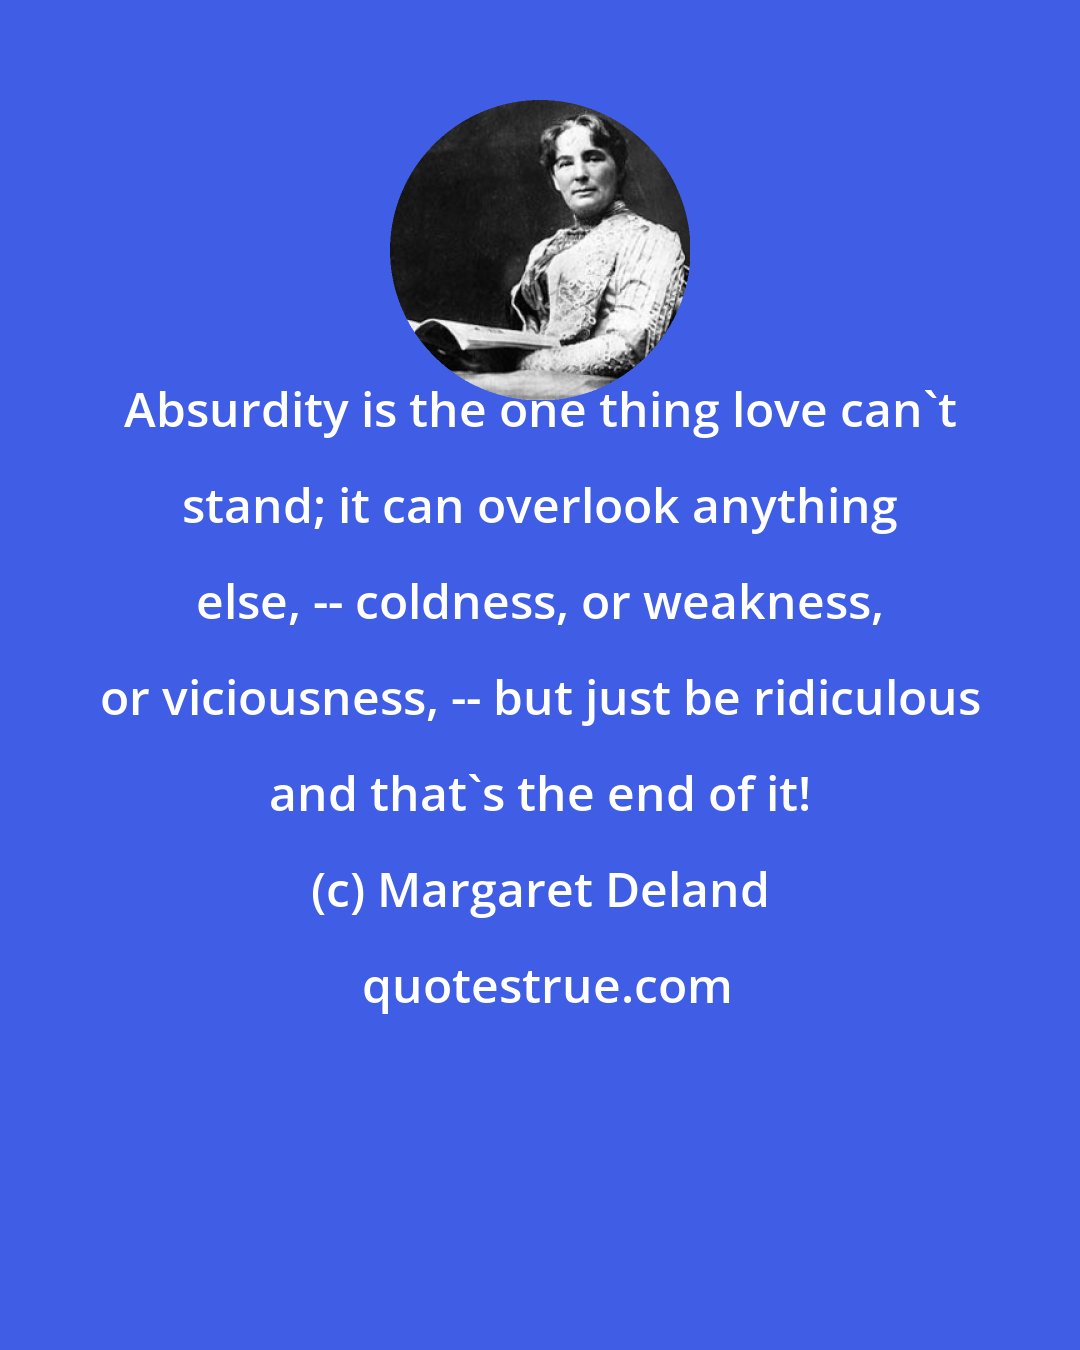 Margaret Deland: Absurdity is the one thing love can't stand; it can overlook anything else, -- coldness, or weakness, or viciousness, -- but just be ridiculous and that's the end of it!